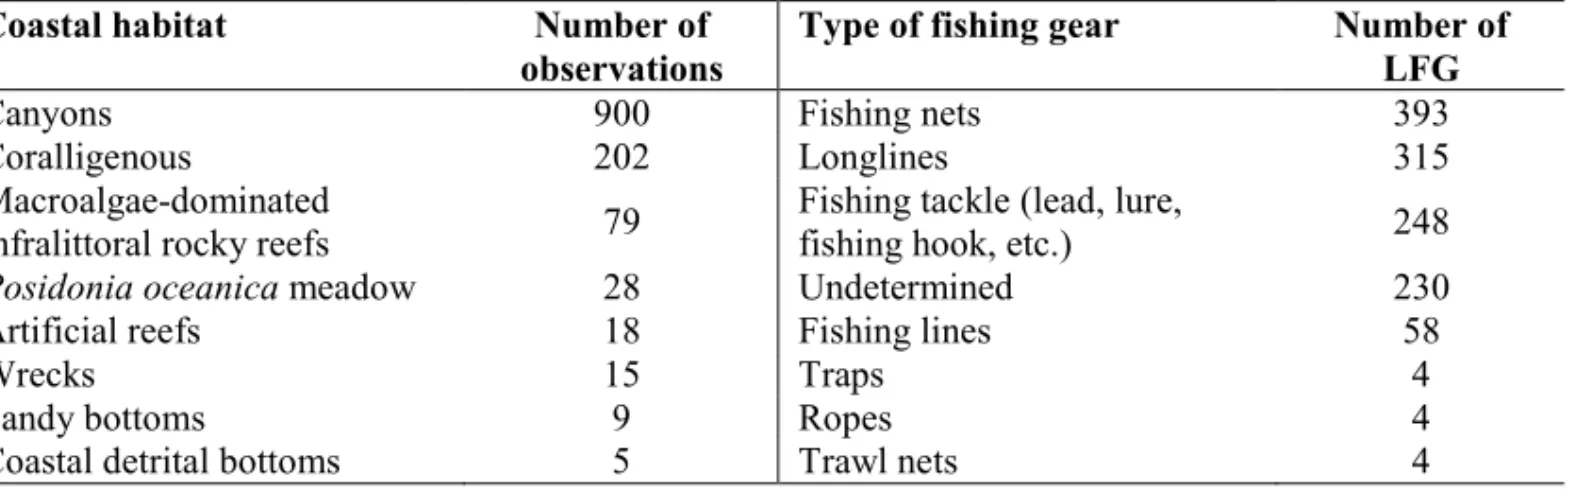 Tab. 5: Number of observations of LFG according to habitats and the type of fishing gear